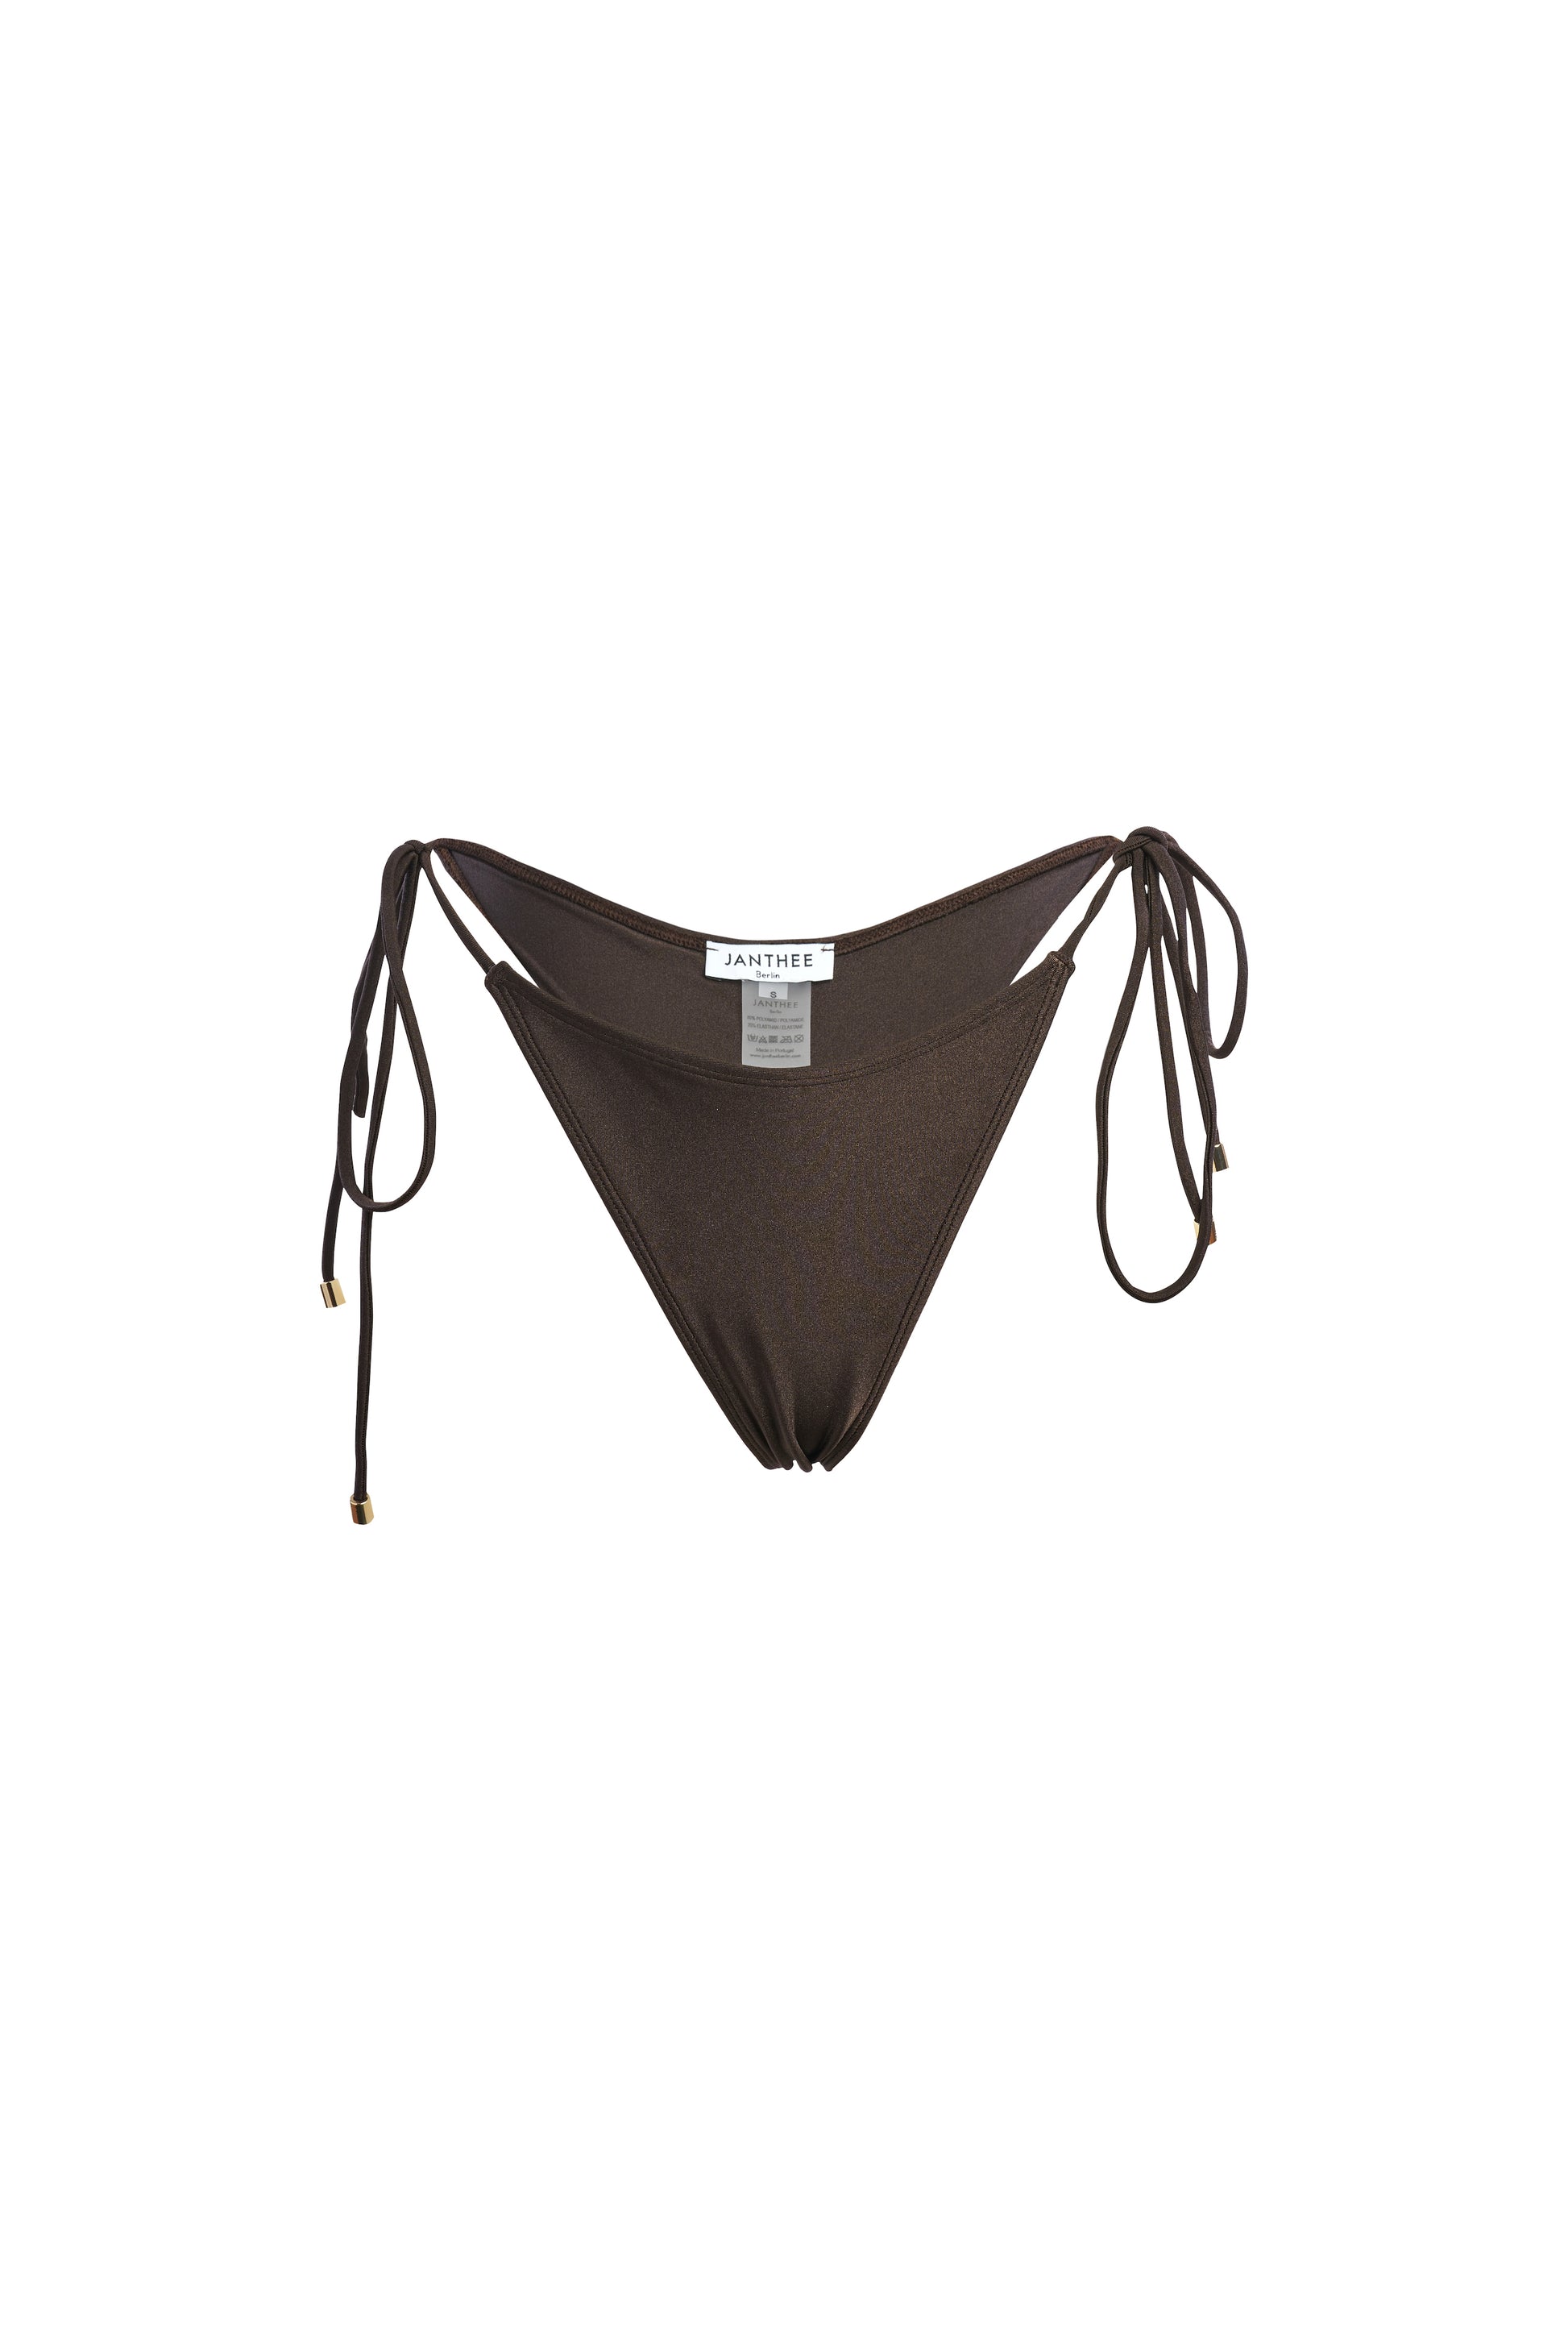 Mounia bottom. An adjustable and brown bottom with golden details.